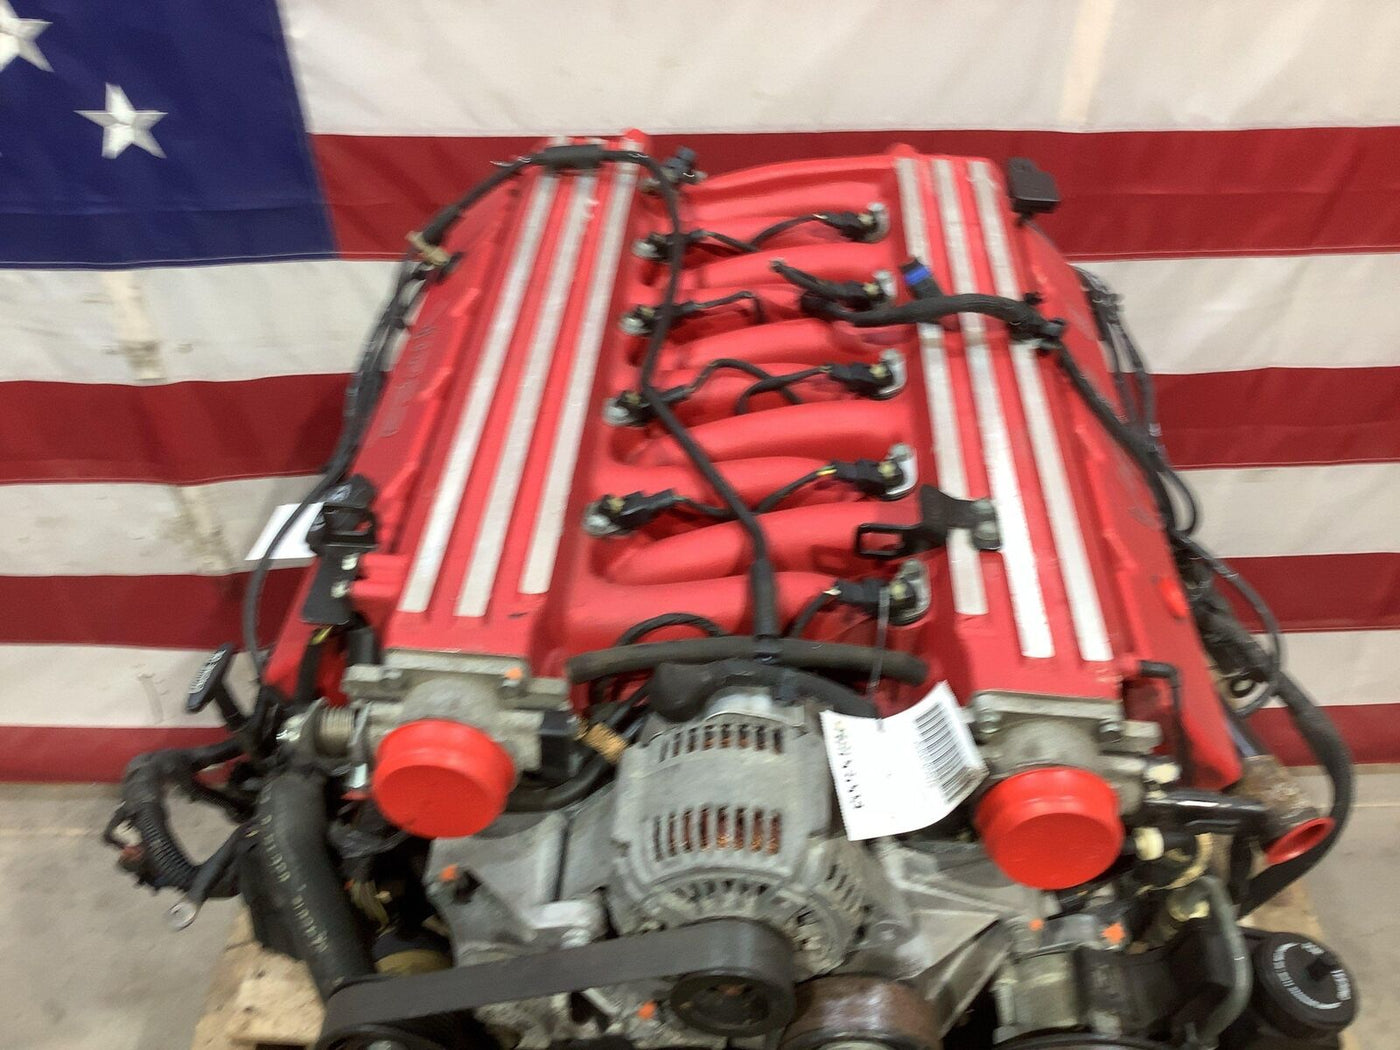 92-02 Dodge Viper RT10 8.0L V10 Engine Dropout W/ Accessories (Video Tested) 15K